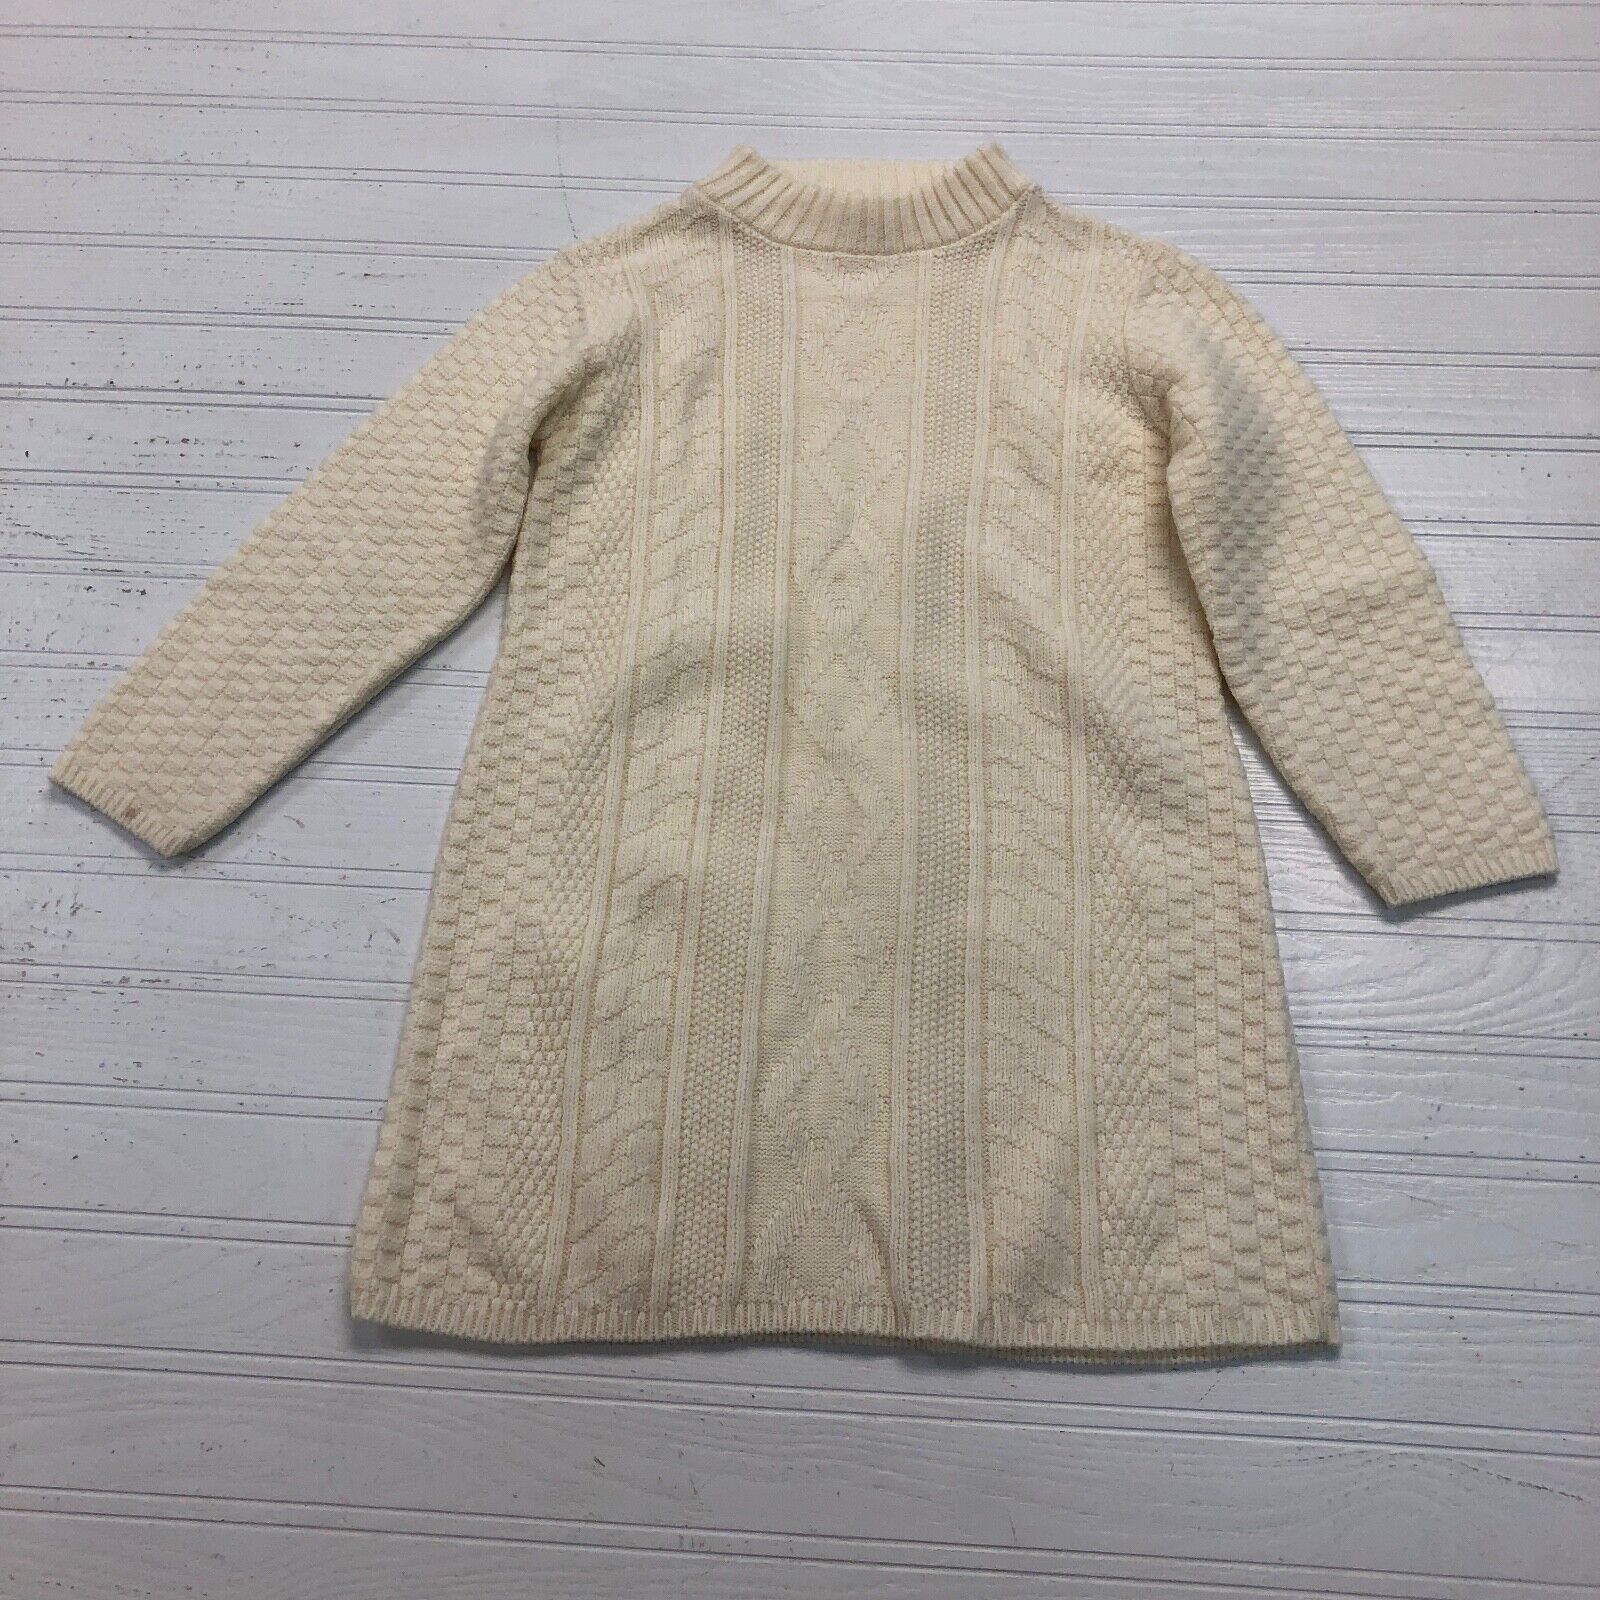 Must Be Love Ivory Knitted Long Sleeve Crew Neck Sweater Dress Youth Girl Size 6